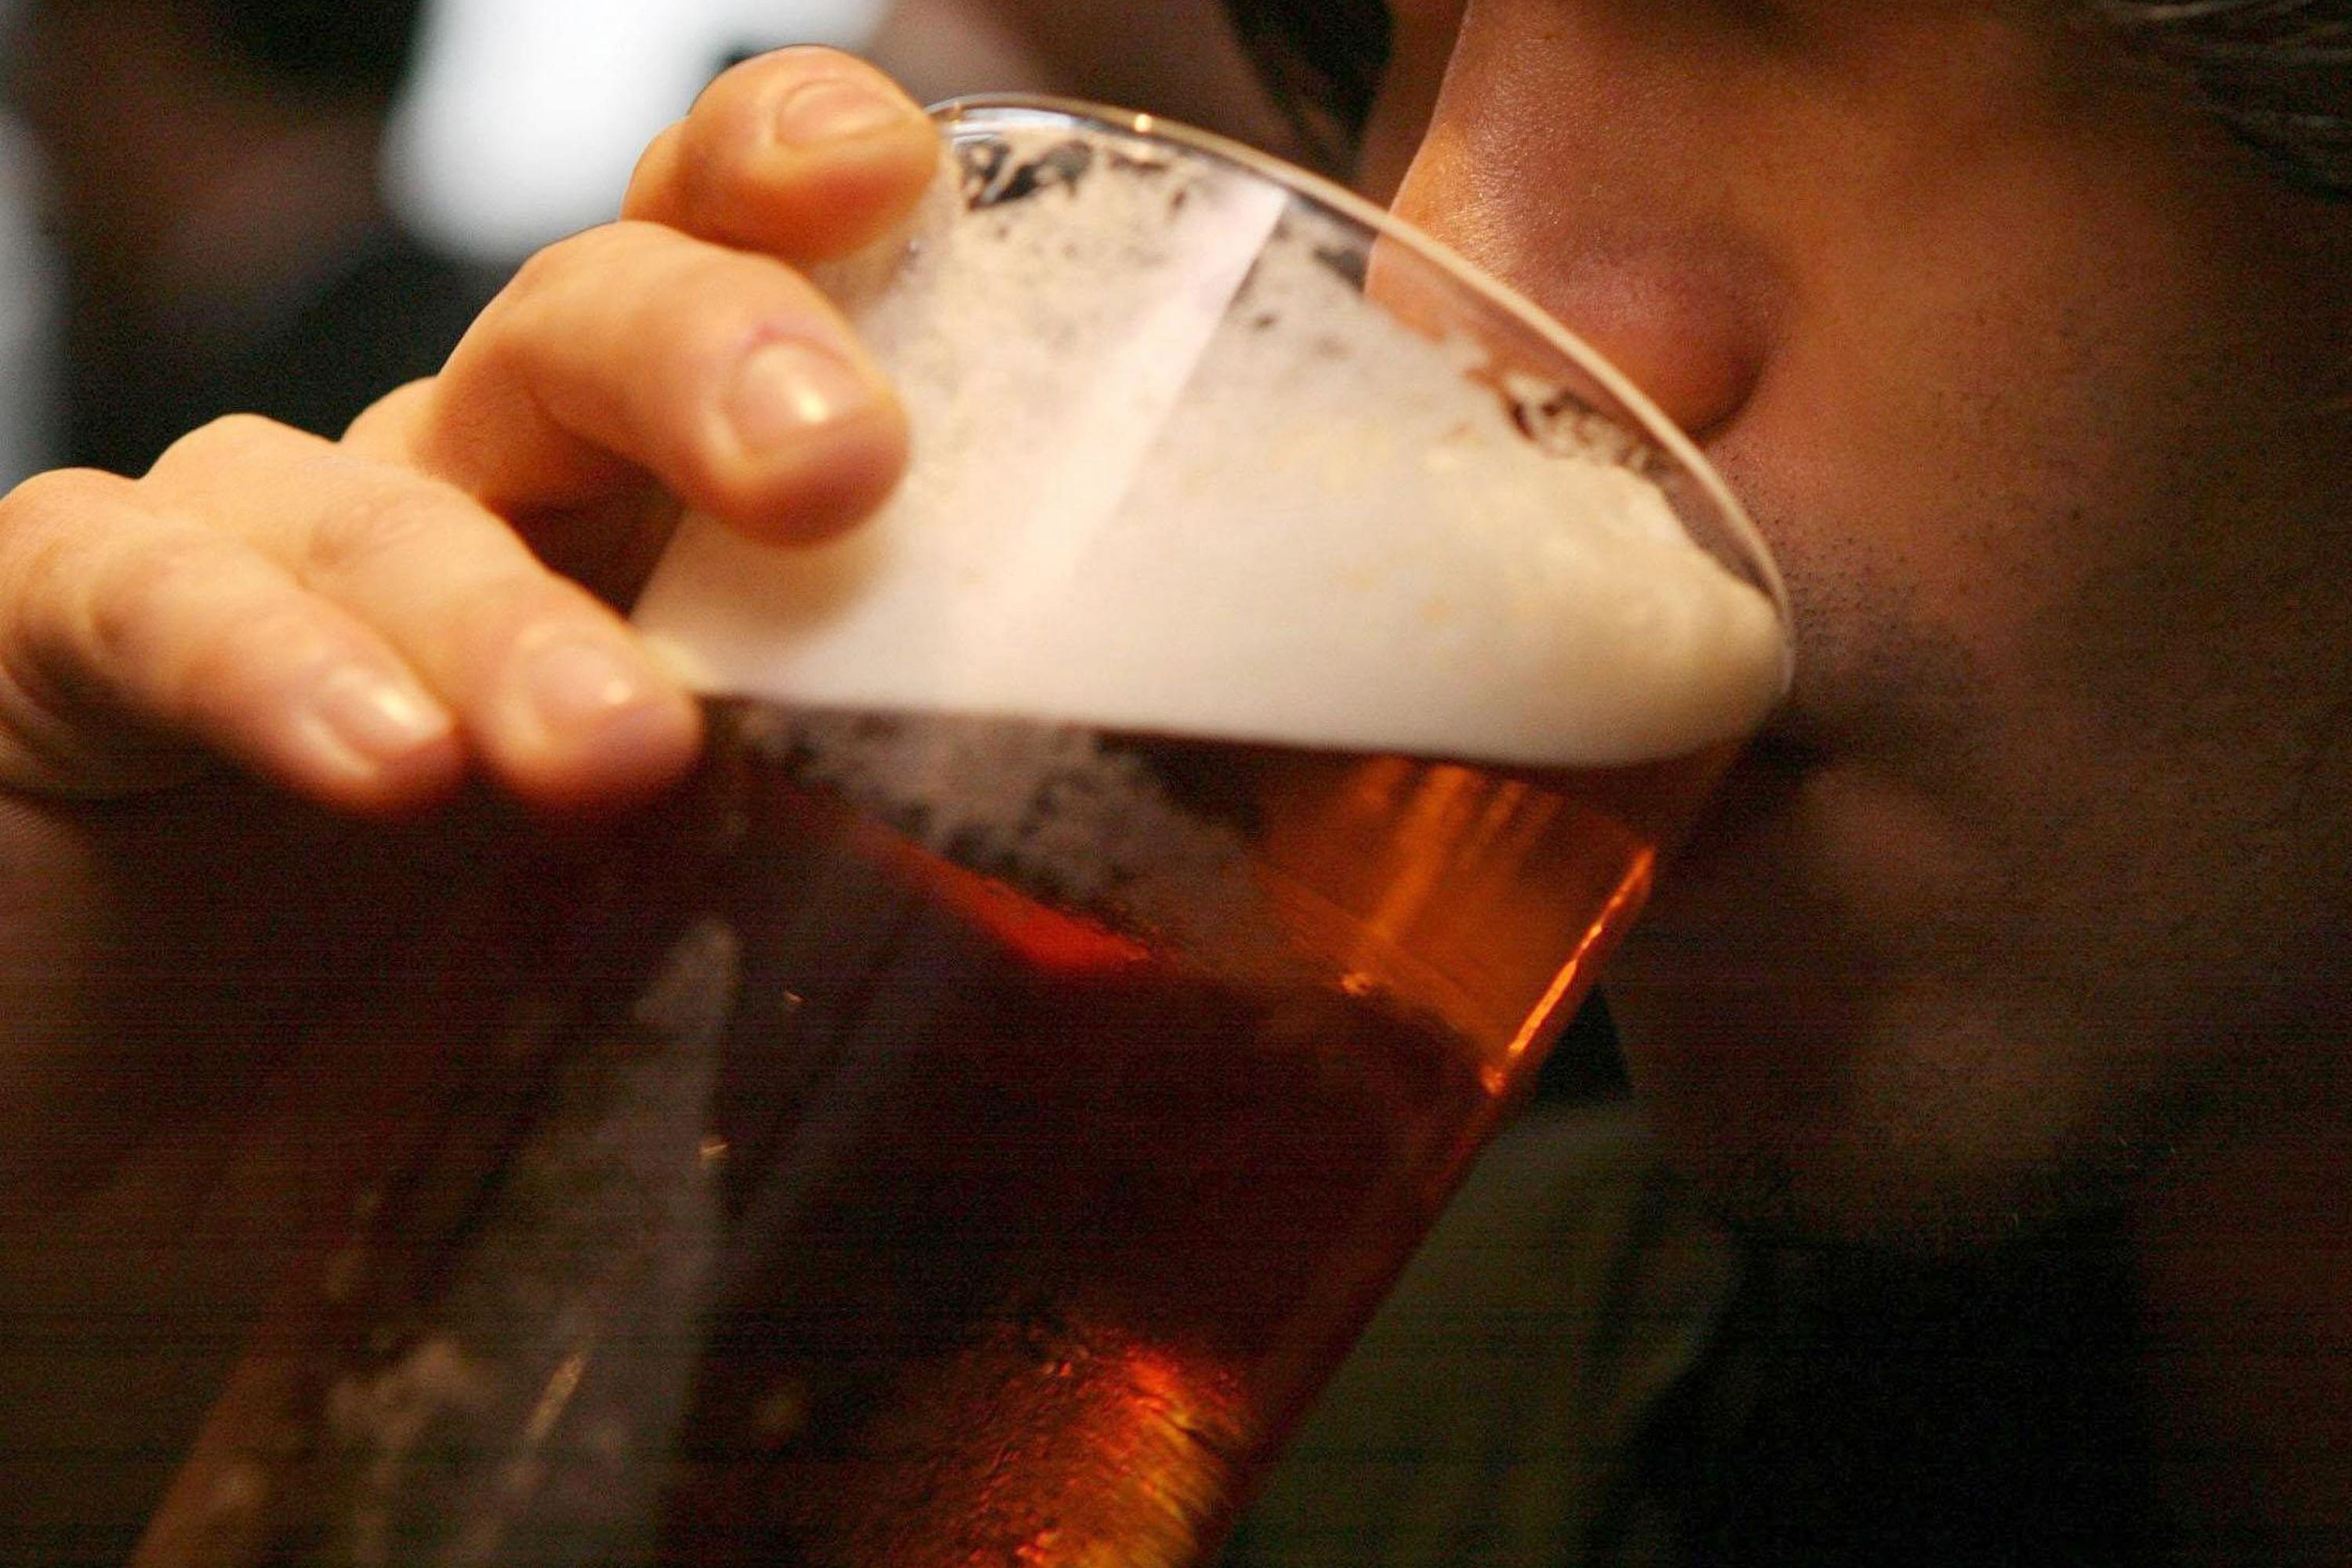 File image: The report looked at studies into the effect of advertising on alcohol consumption